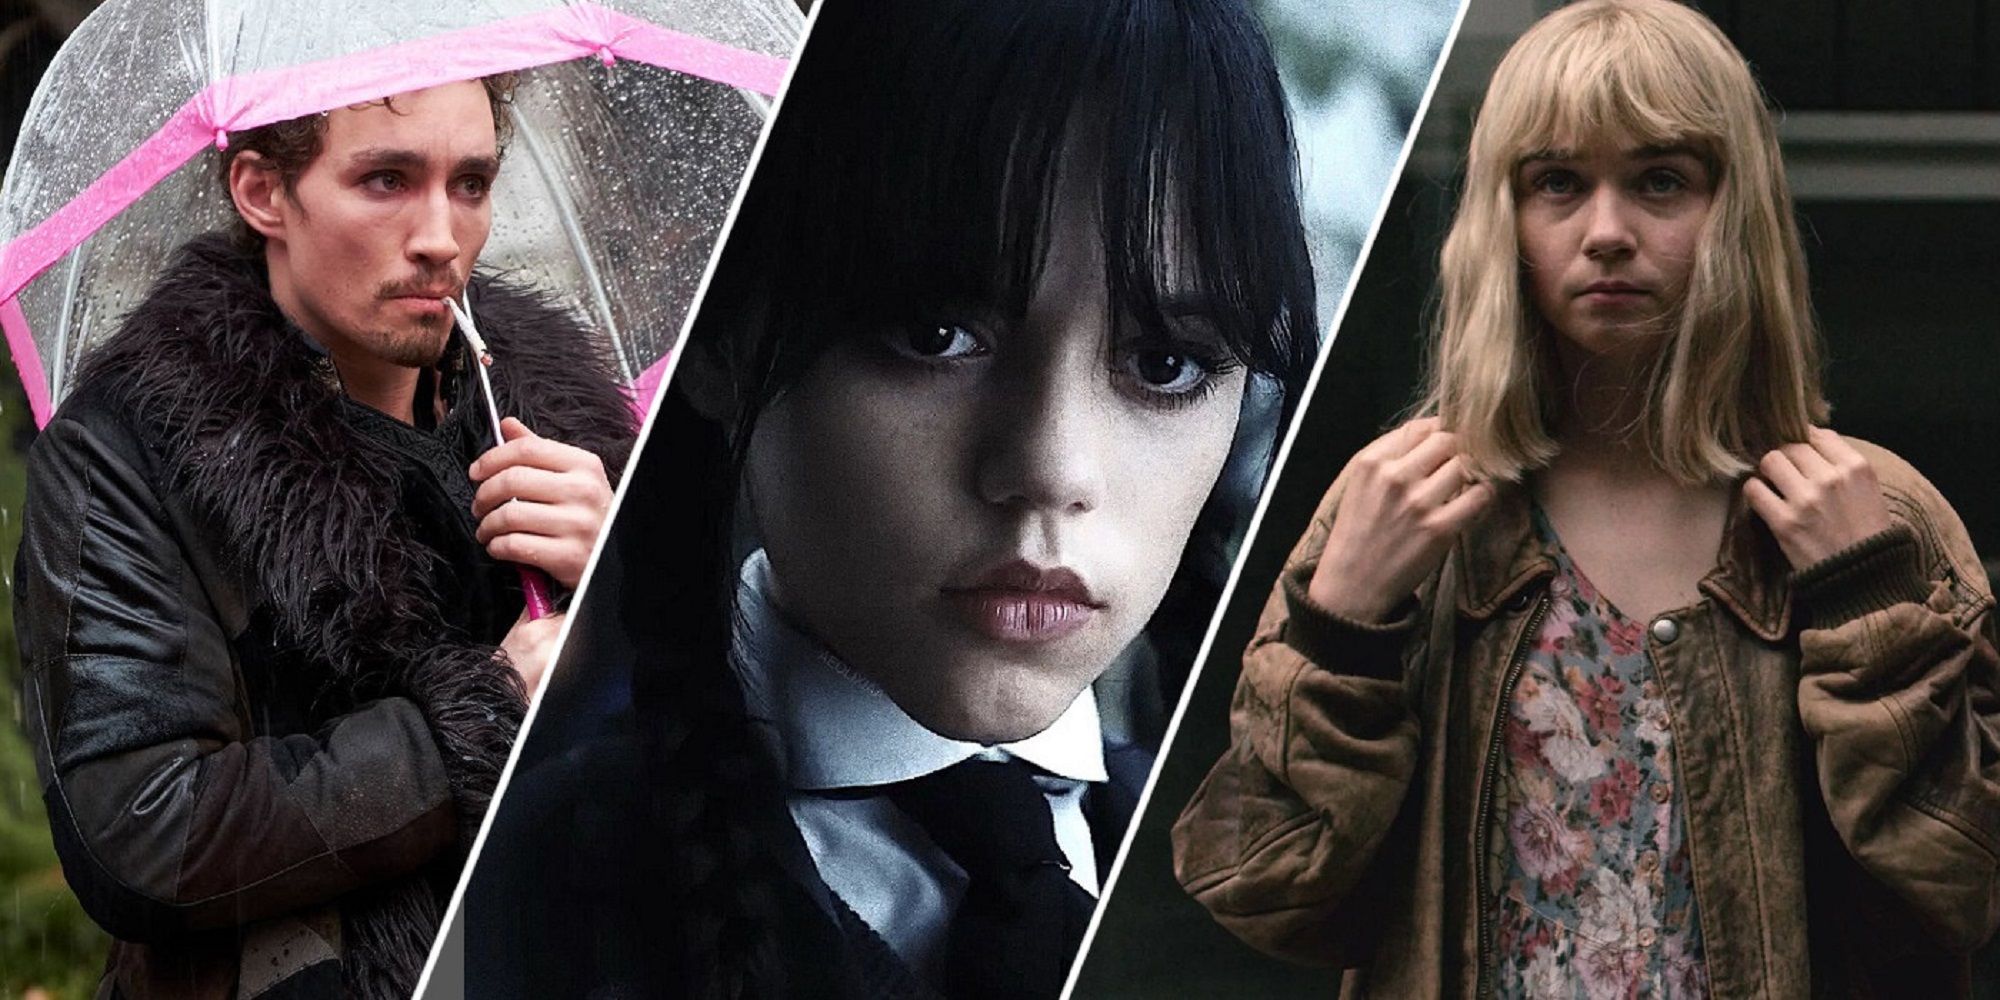 Klaus Hargreeves holding an umbrealla and smoking a cigarette, Wednesday Addams staring coldly, and Alyssa after bleaching her hair in 'The End of the F***ing World.'